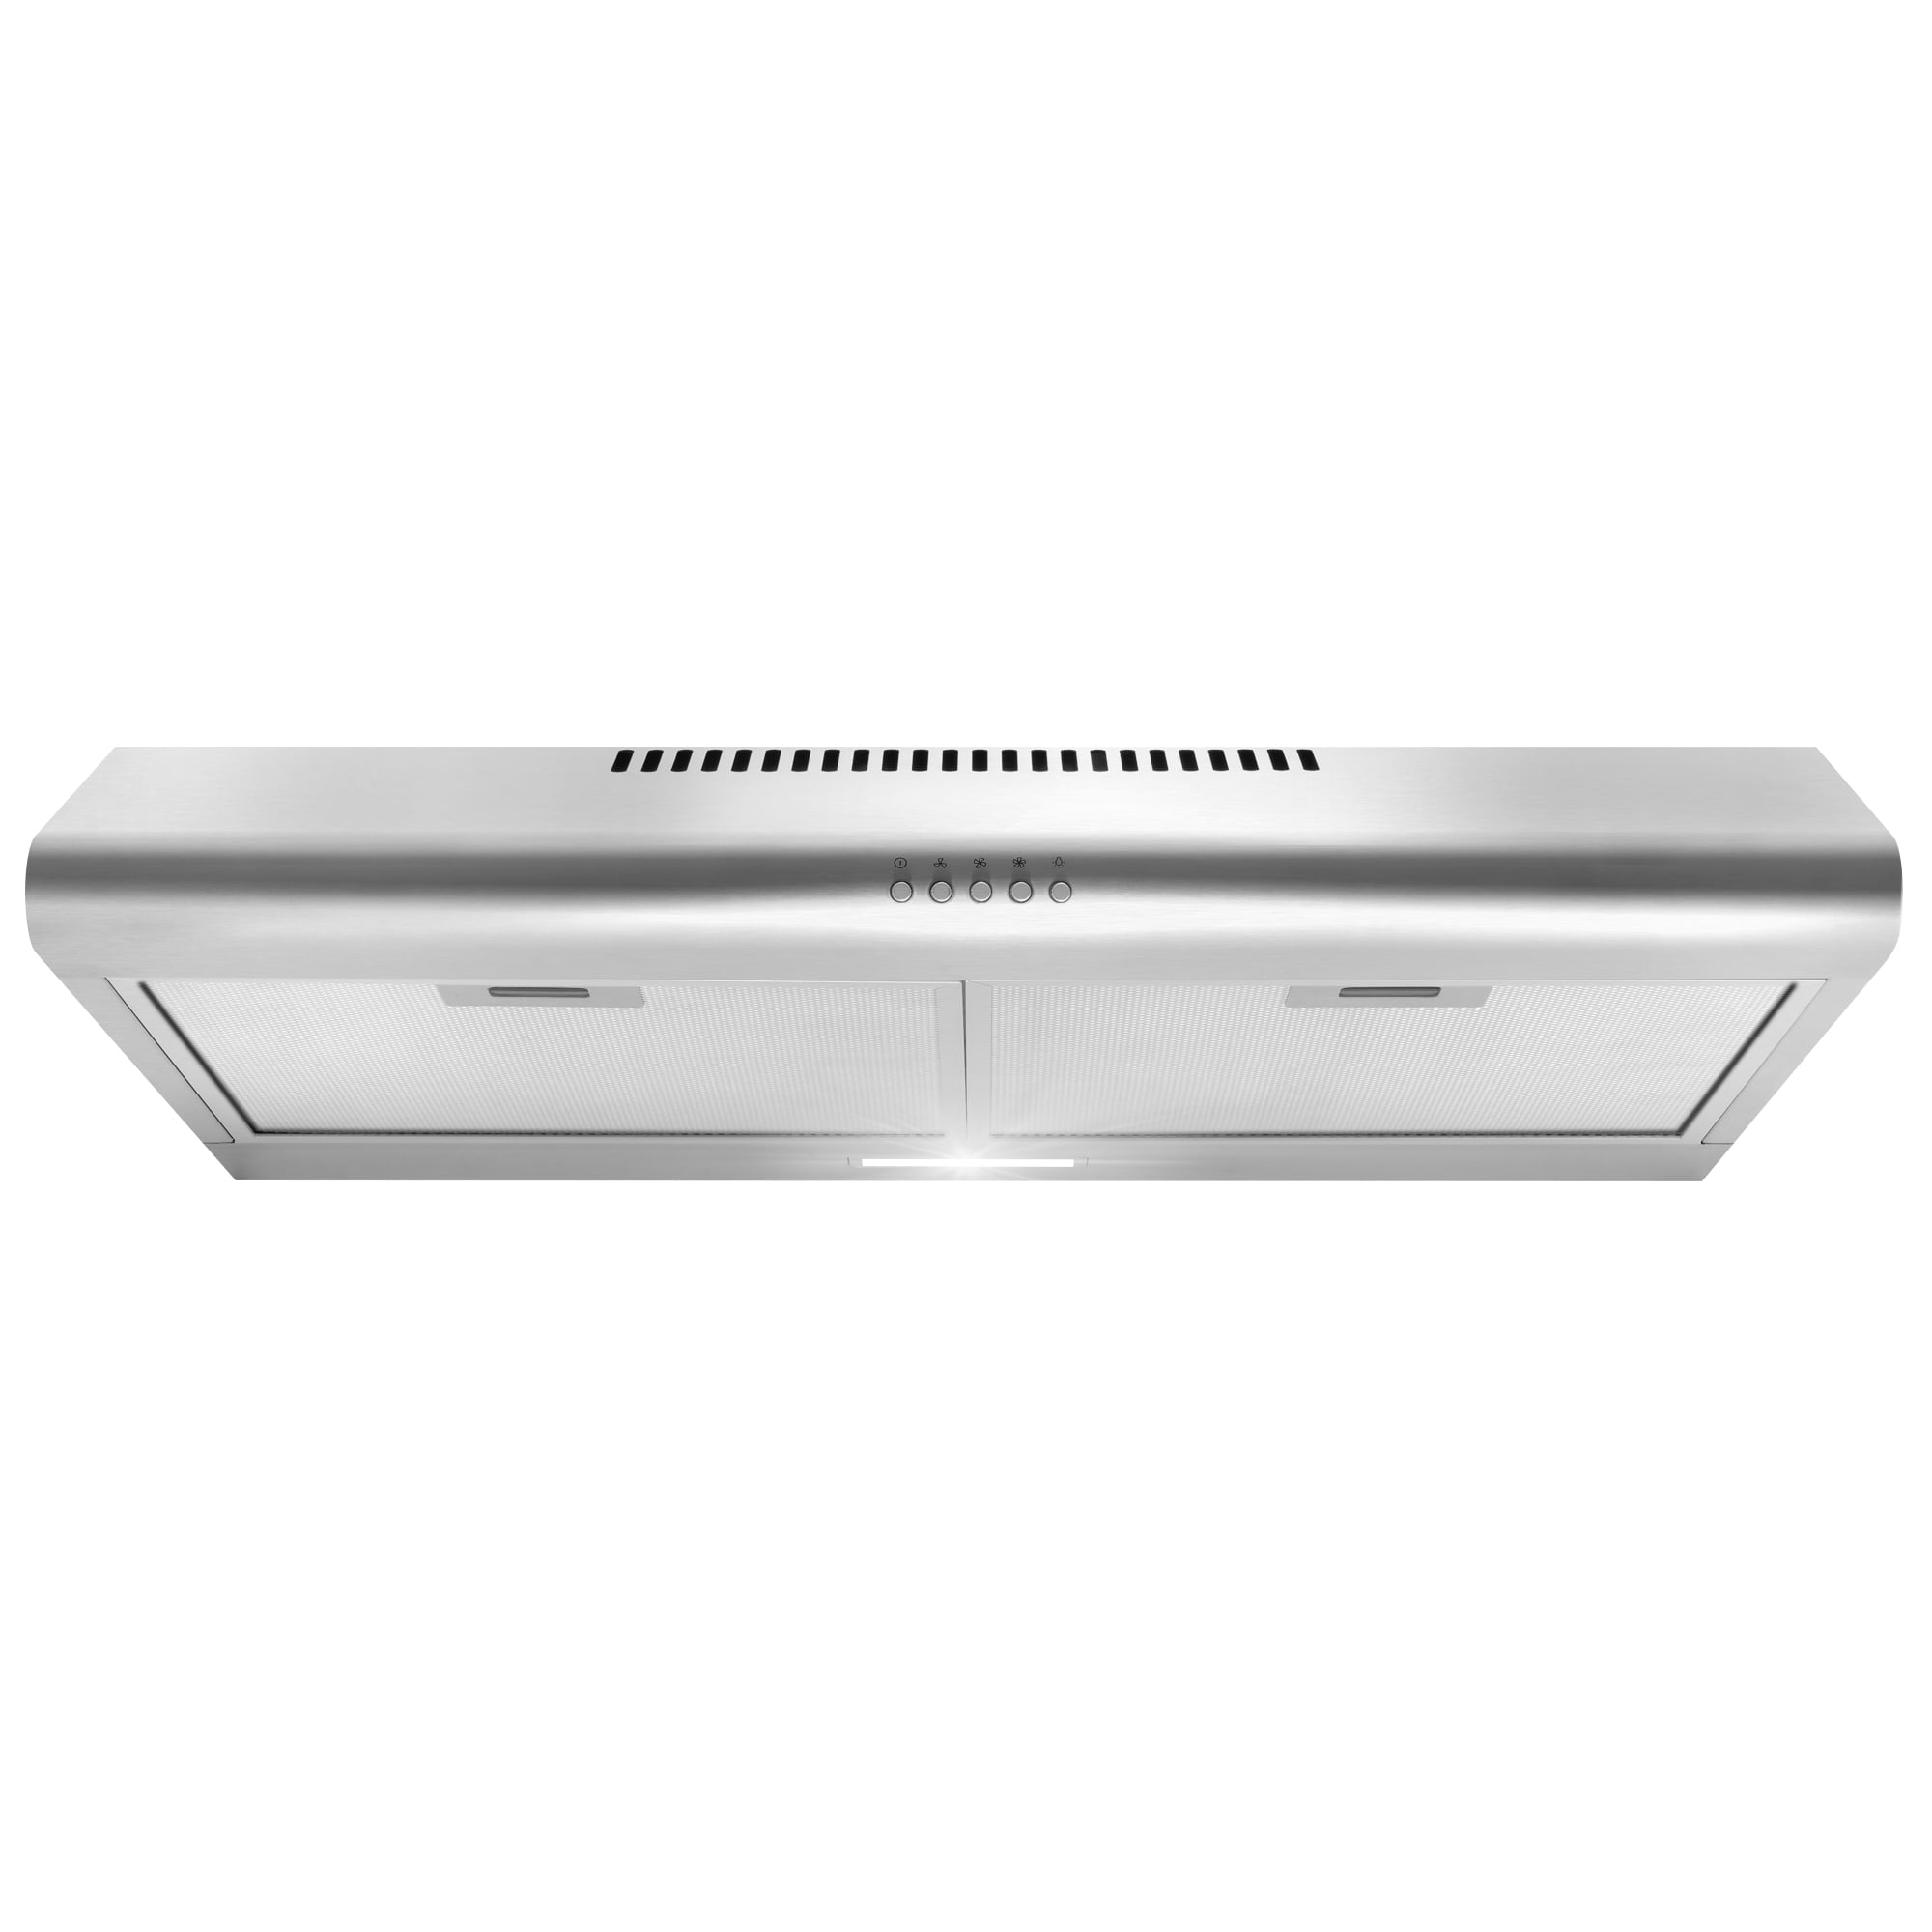 Range Hood 30 inch Under Cabinet,Black Stainless Steel Range Hood with 500  CFM,Ductless Range Hood Black,Kitchen Vent Hood 30 inch with 3 Way  Venting,Baffle Filters,LED Light 